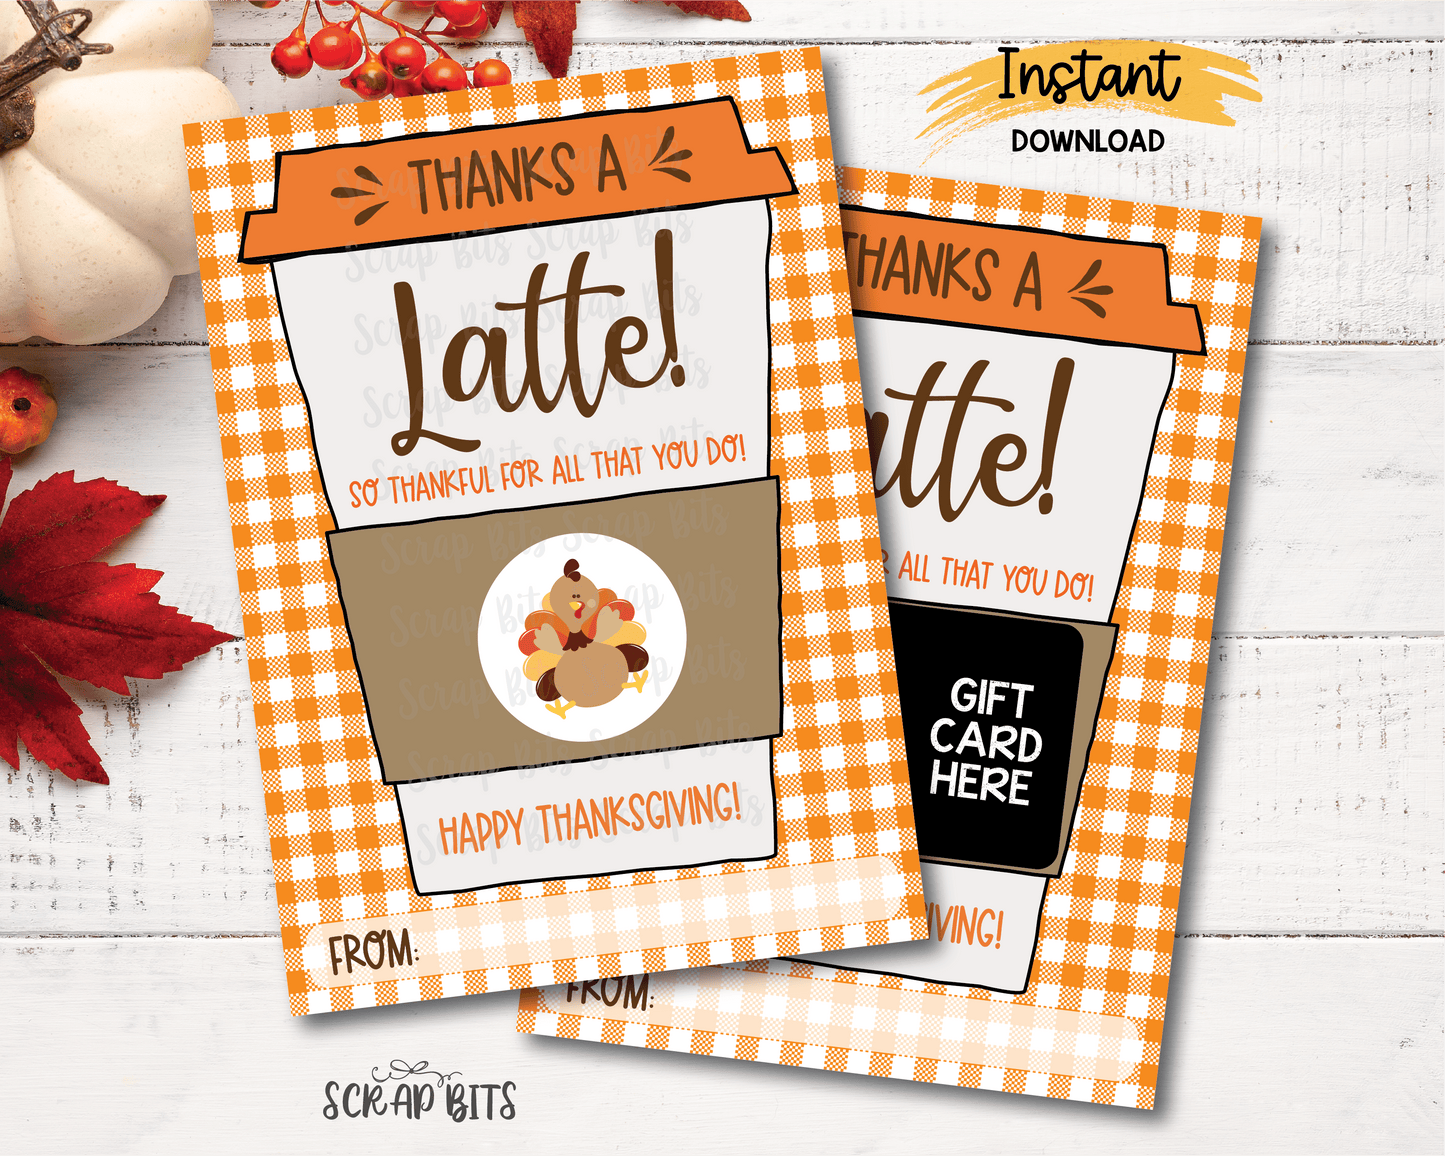 Thanks A Latte Printable Thanksgivng Gift Card Holder for Coffee, Instant Download - Scrap Bits